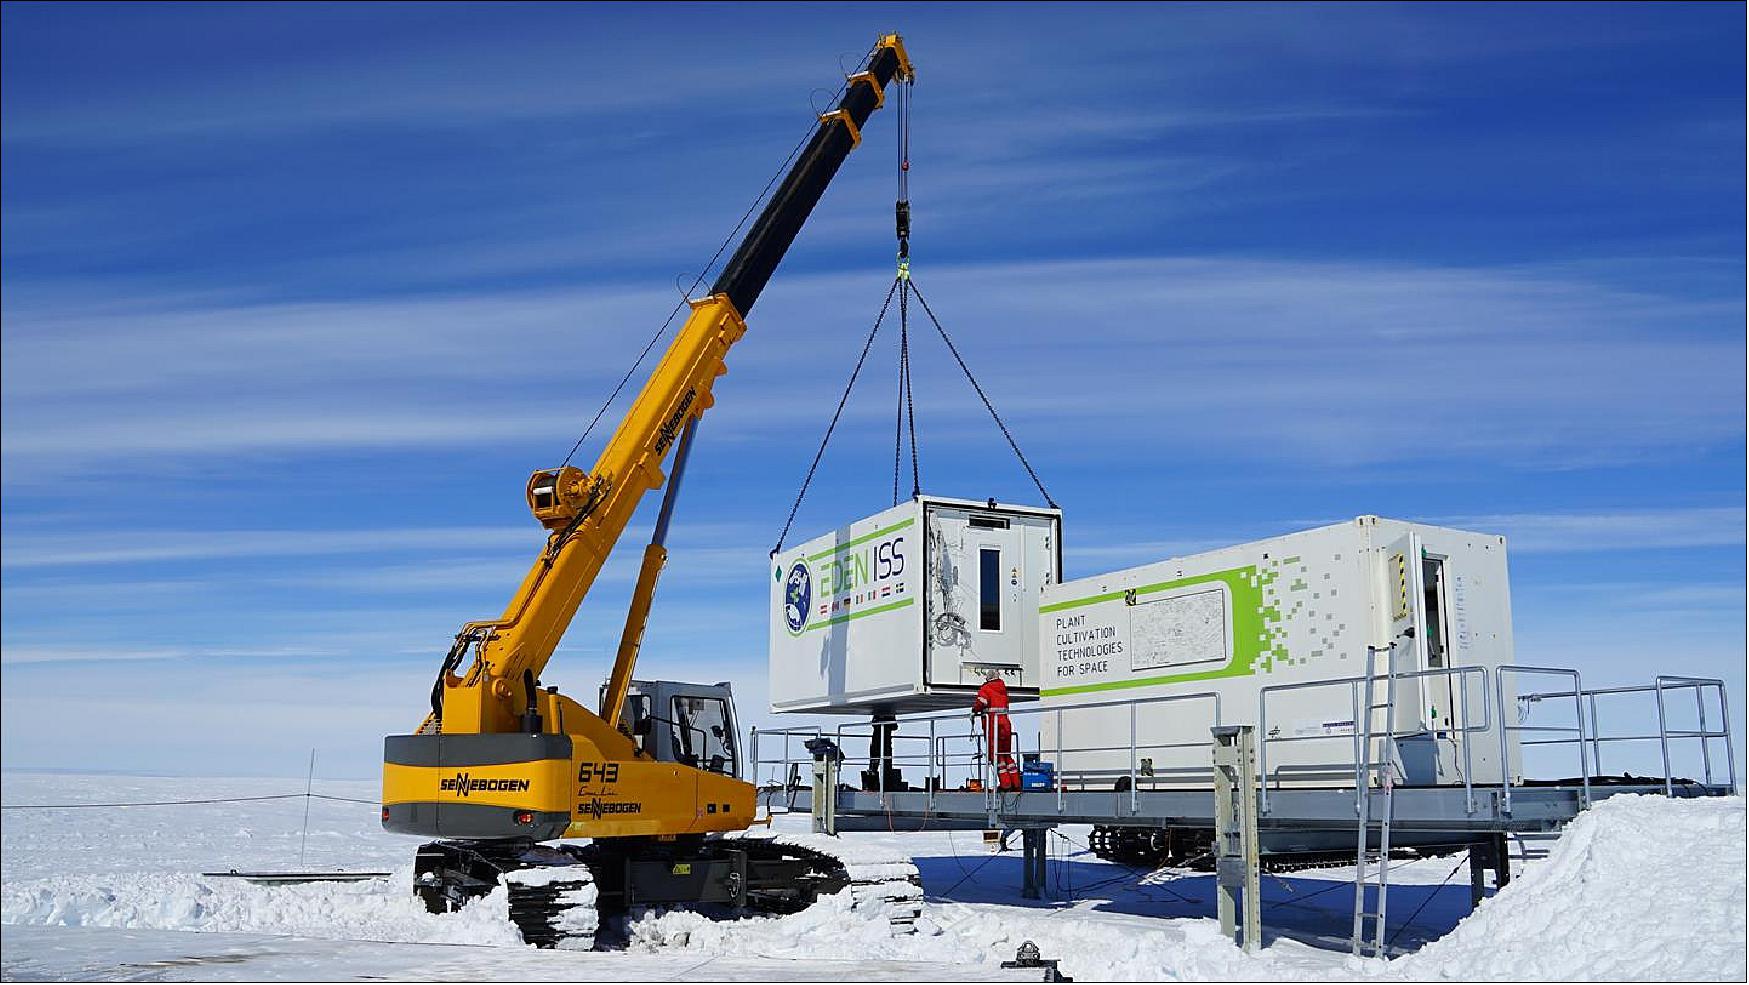 Figure 10: Offloading of the EDEN ISS greenhouse in the Antarctic (image credit: DLR)